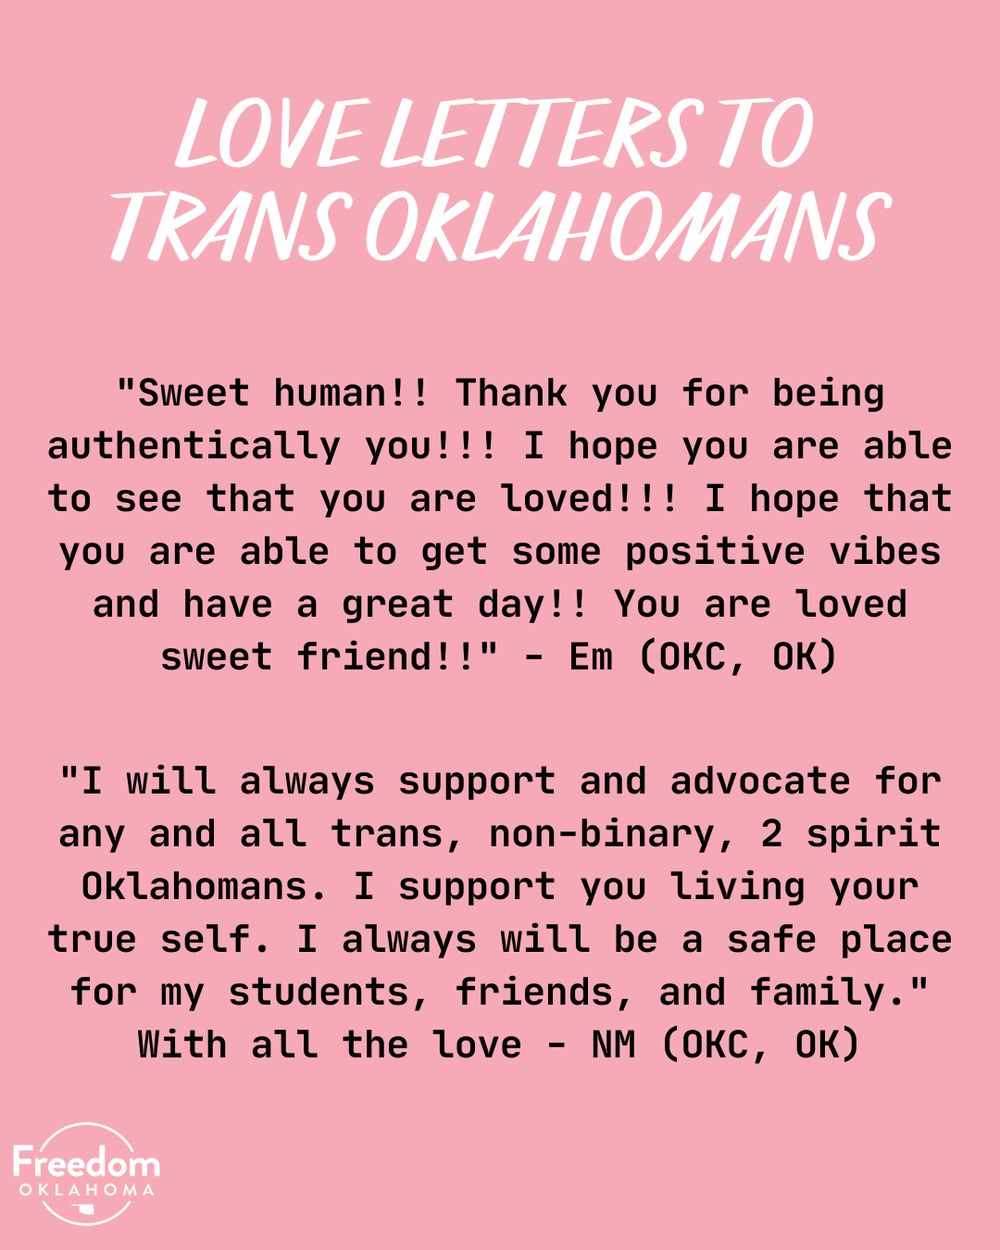  "Love Letters to Trans Oklahomans" and the text of 2 love letters on a pink background. #1: "Sweet human!! Thank you for being authentically you!!! I hope you are able to see that you are loved!!! I hope that you are able to get some positive vibes 